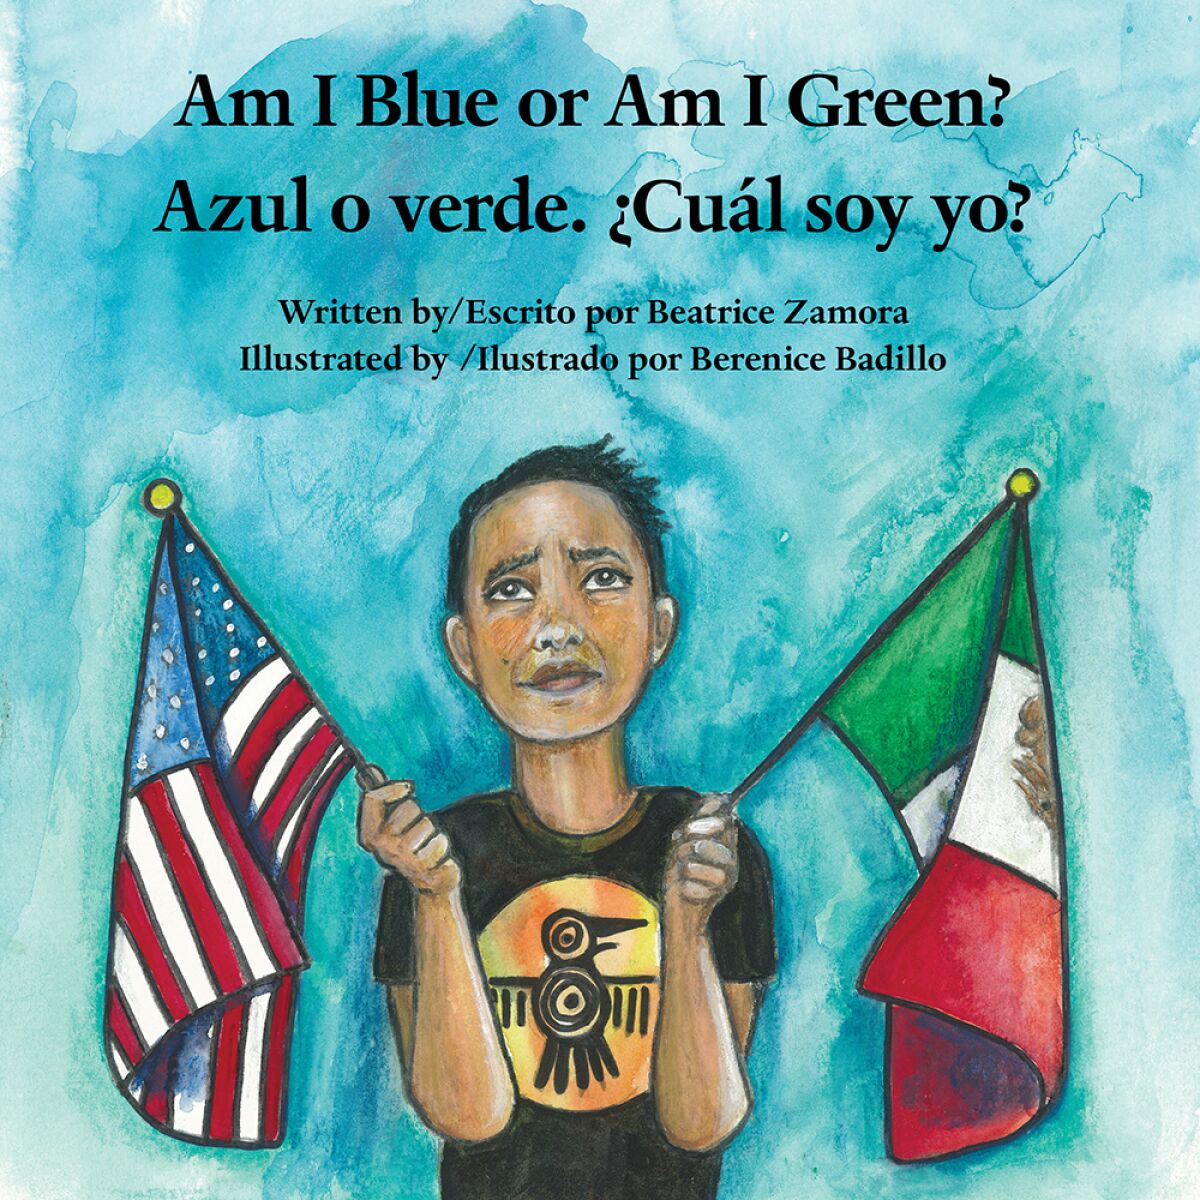 Bookcover of "Am I Blue, or Am I Green?"